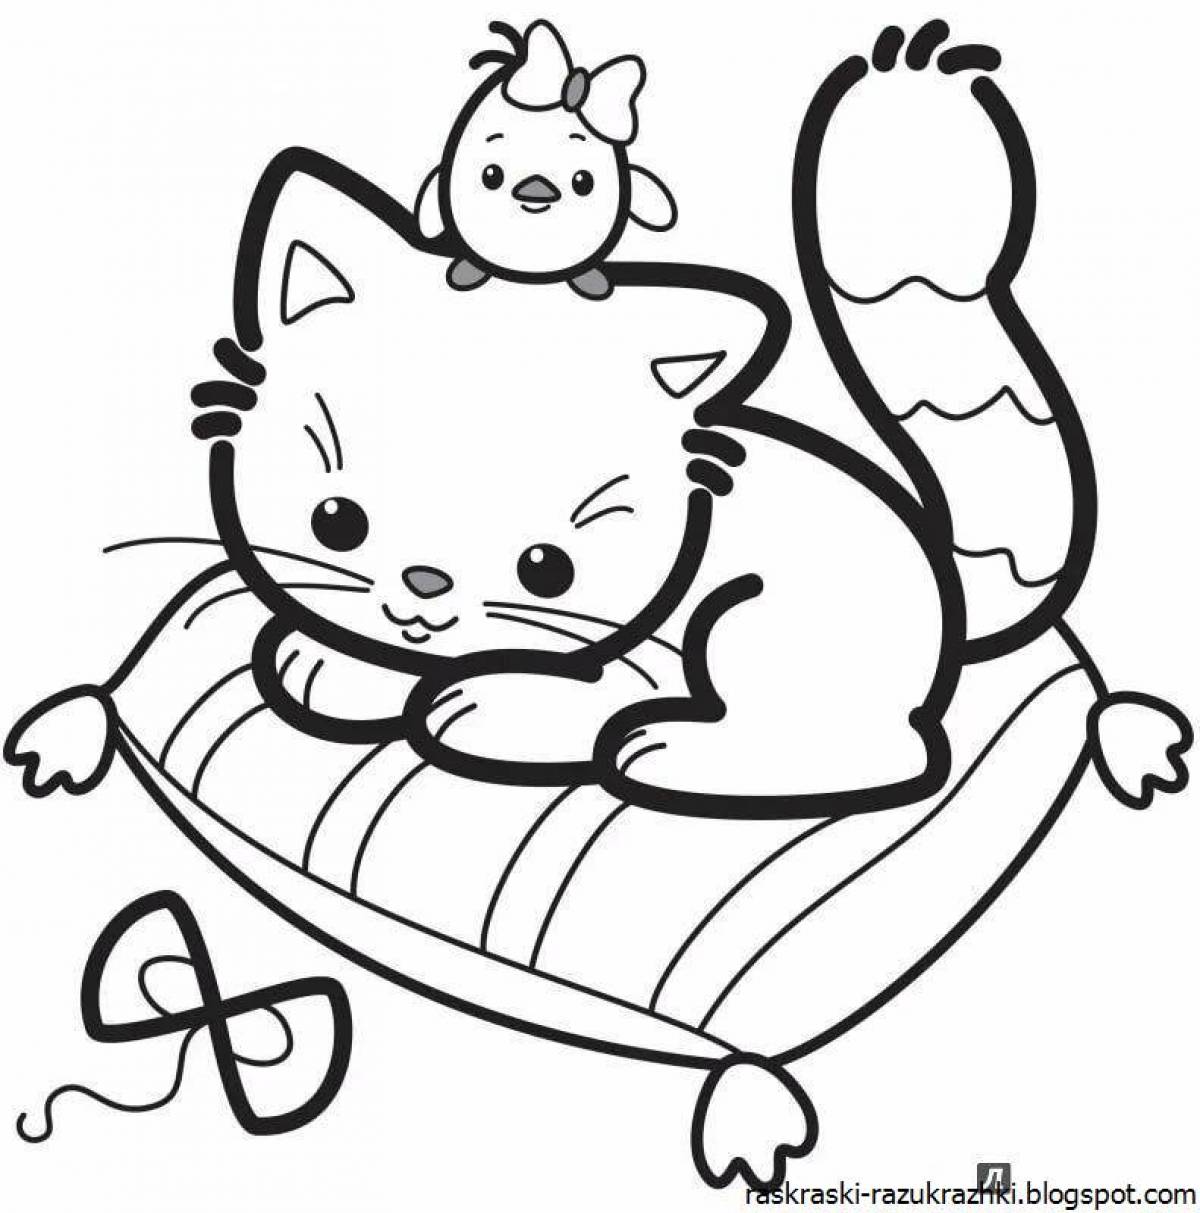 Friendly cat coloring book for 3-4 year olds